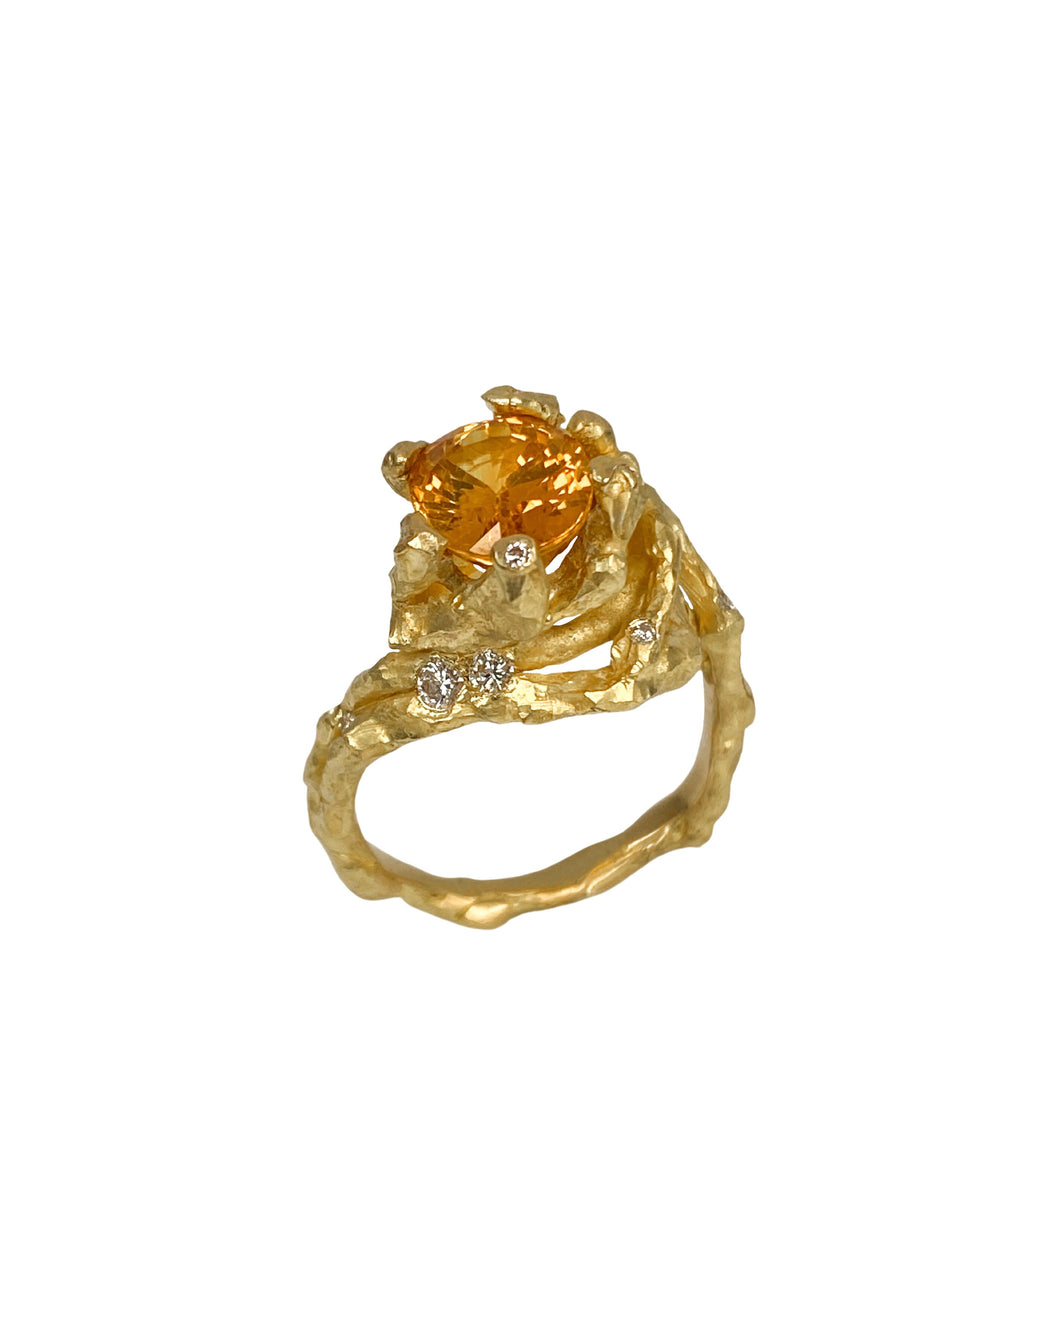 ENCHANTED FOREST RING — ORANGE SAPPHIRE AND DIAMONDS